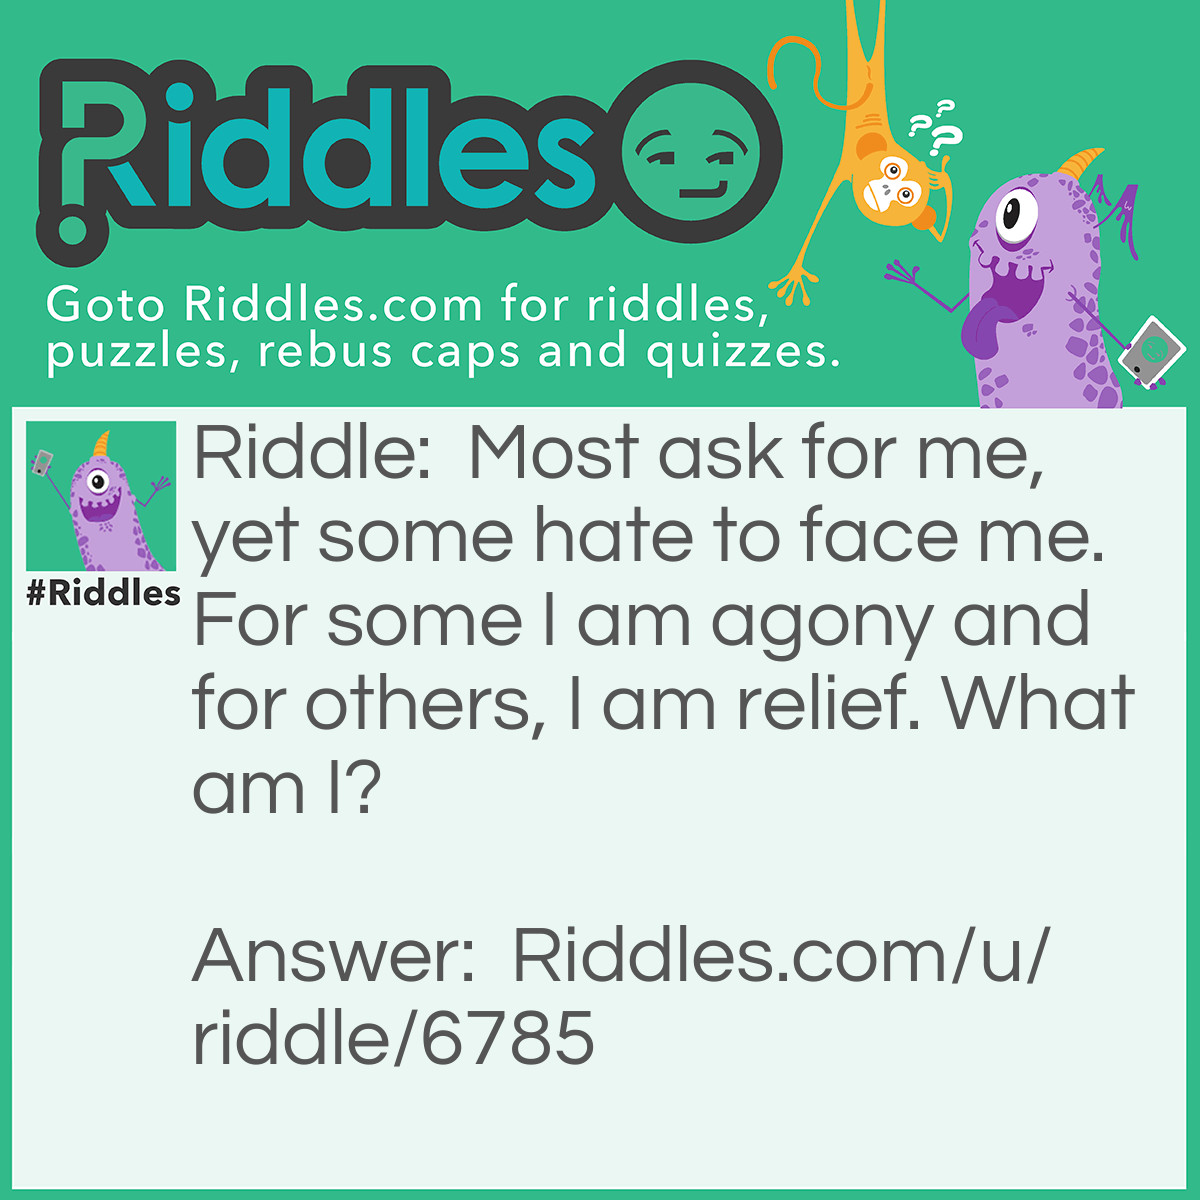 Riddle: Most ask for me, yet some hate to face me. For some I am agony and for others, I am relief. What am I? Answer: The truth.